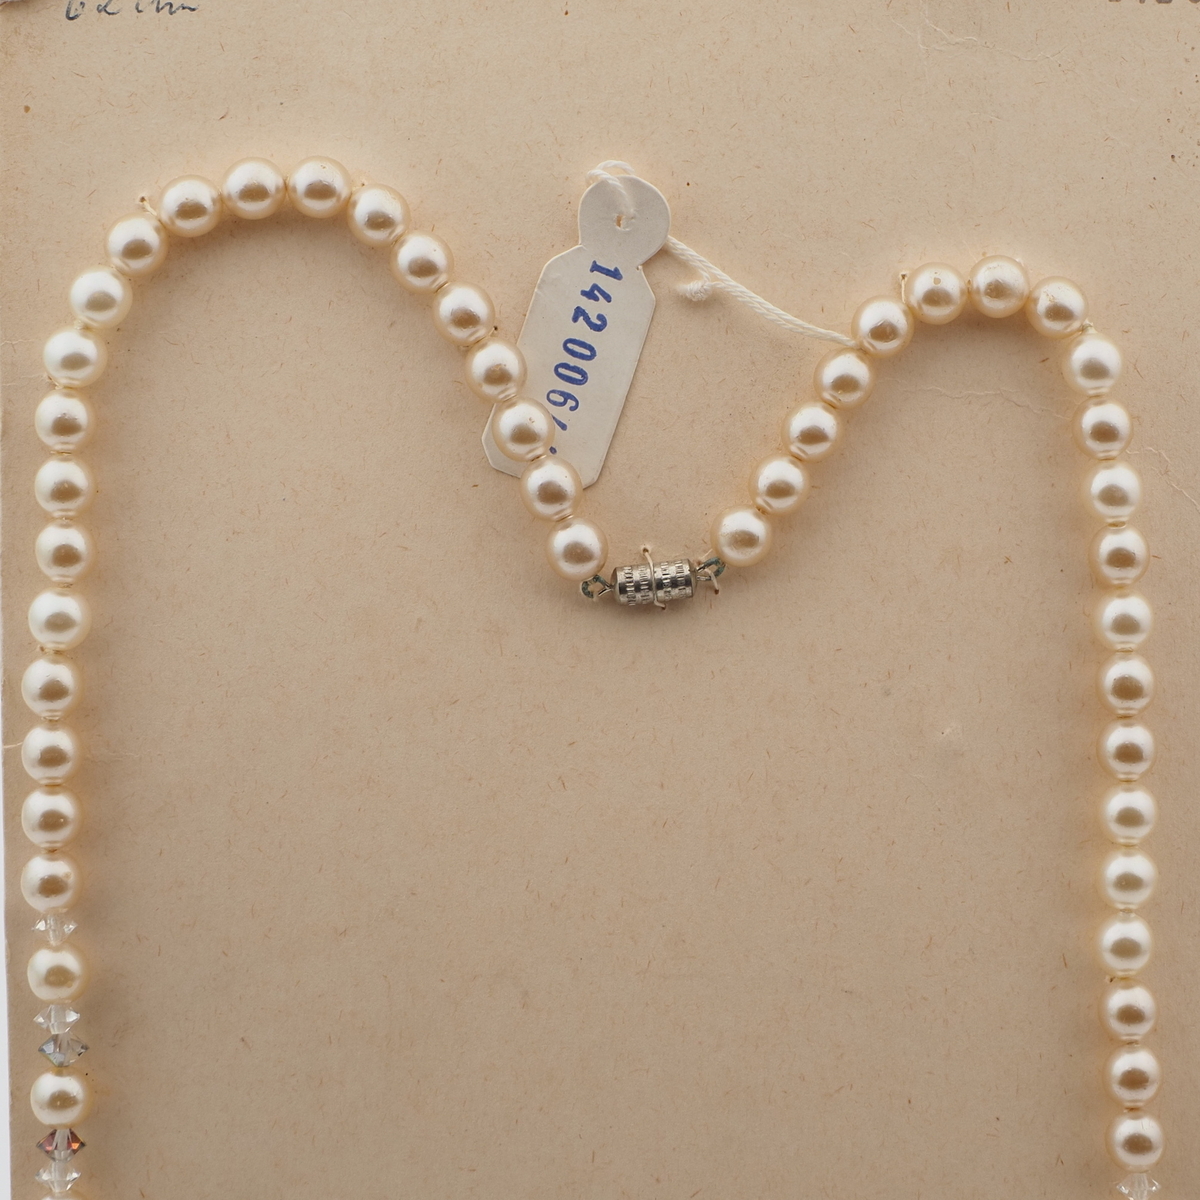 Vintage Czech necklace pearl clear glass beads 24"